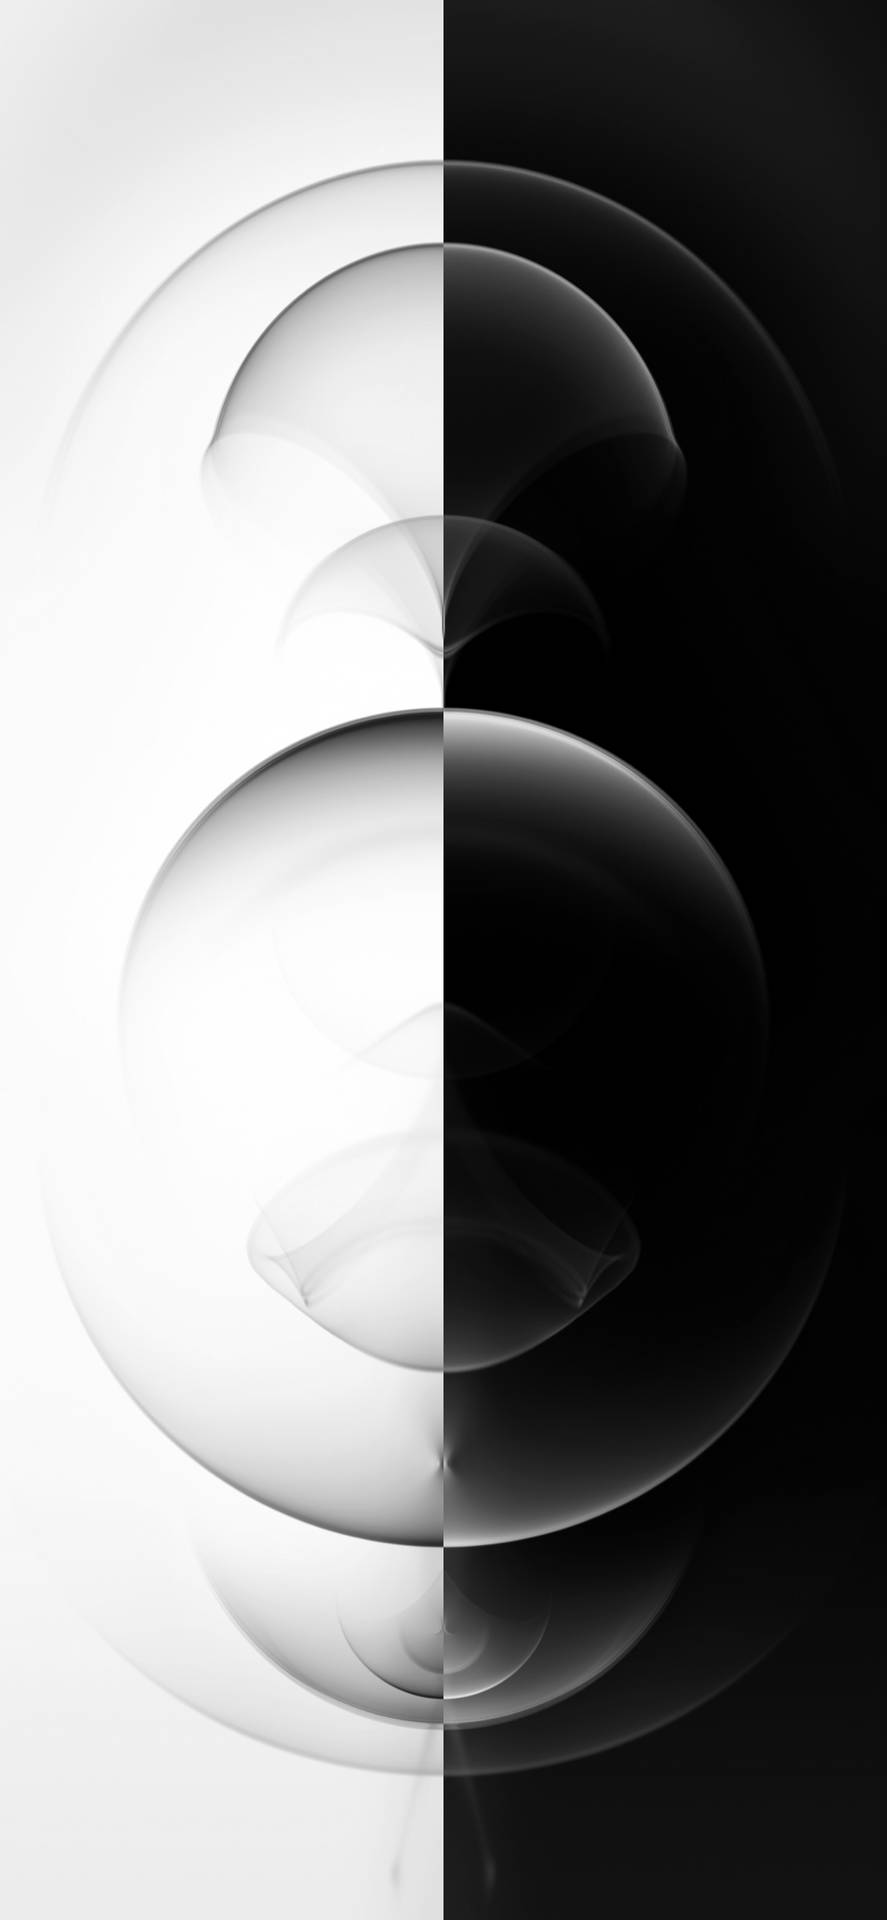 Black And White Patterns Iphone 2021 Wallpaper